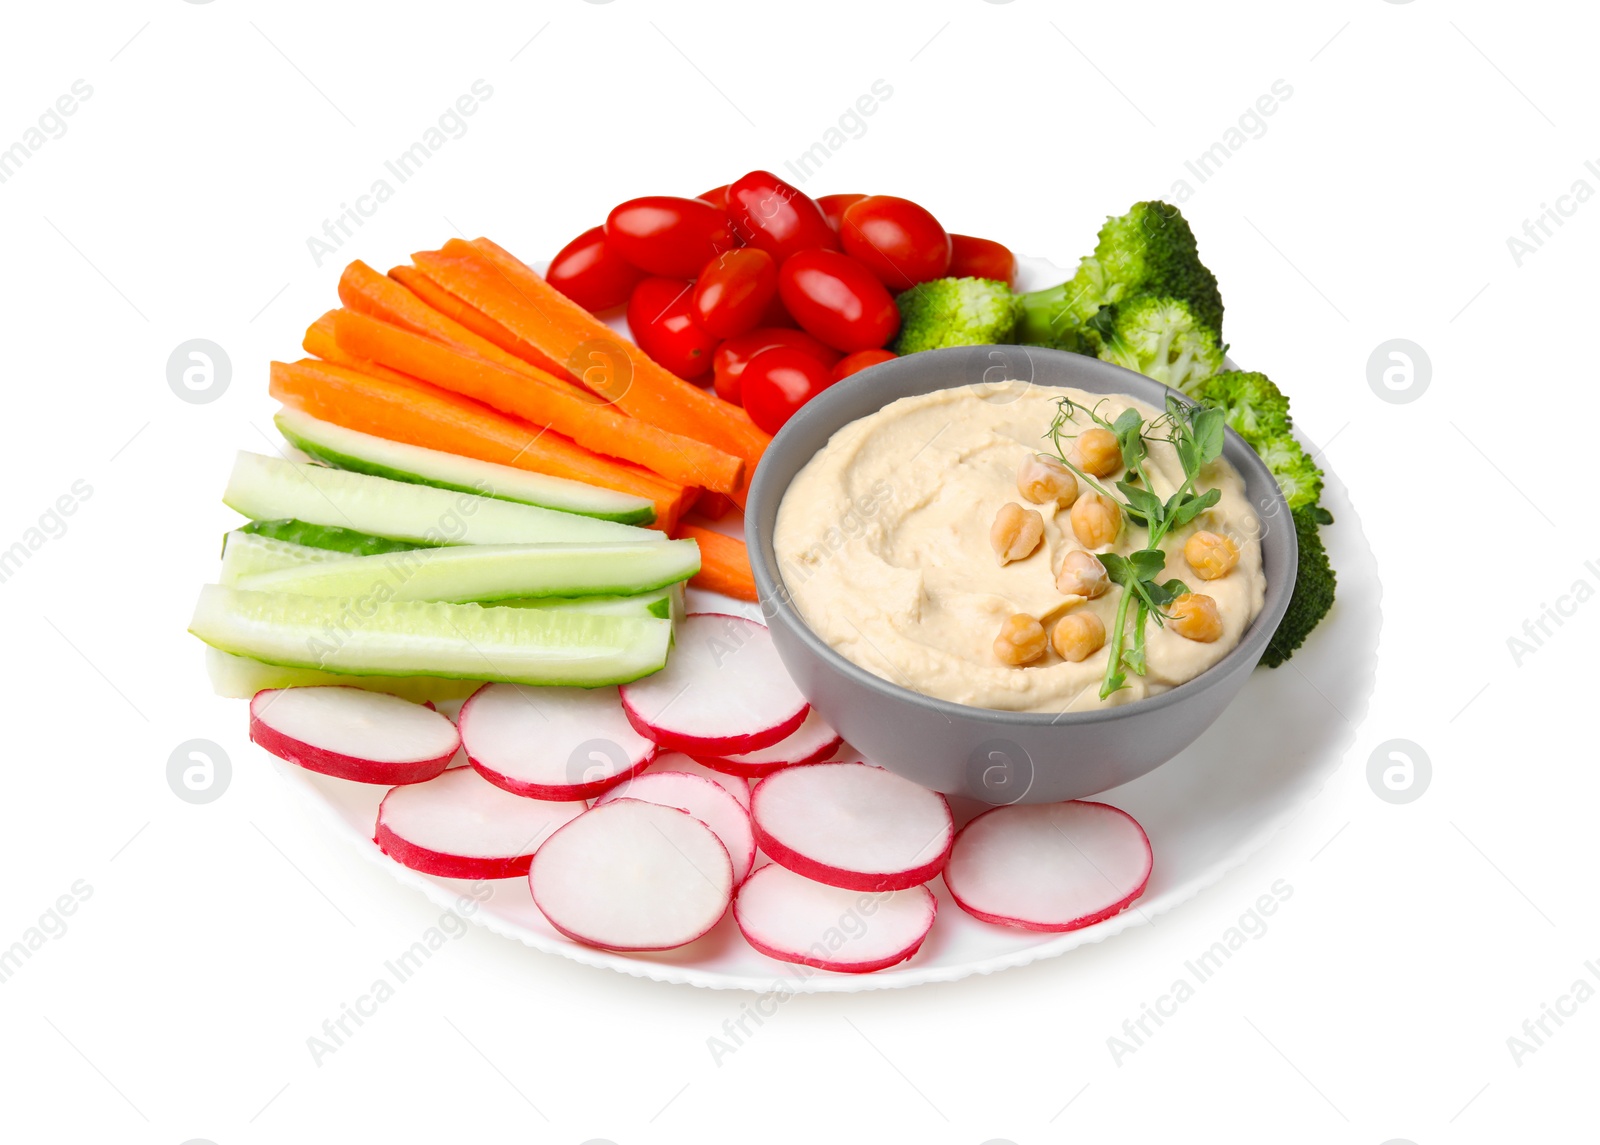 Photo of Plate with delicious hummus and fresh vegetables on white background